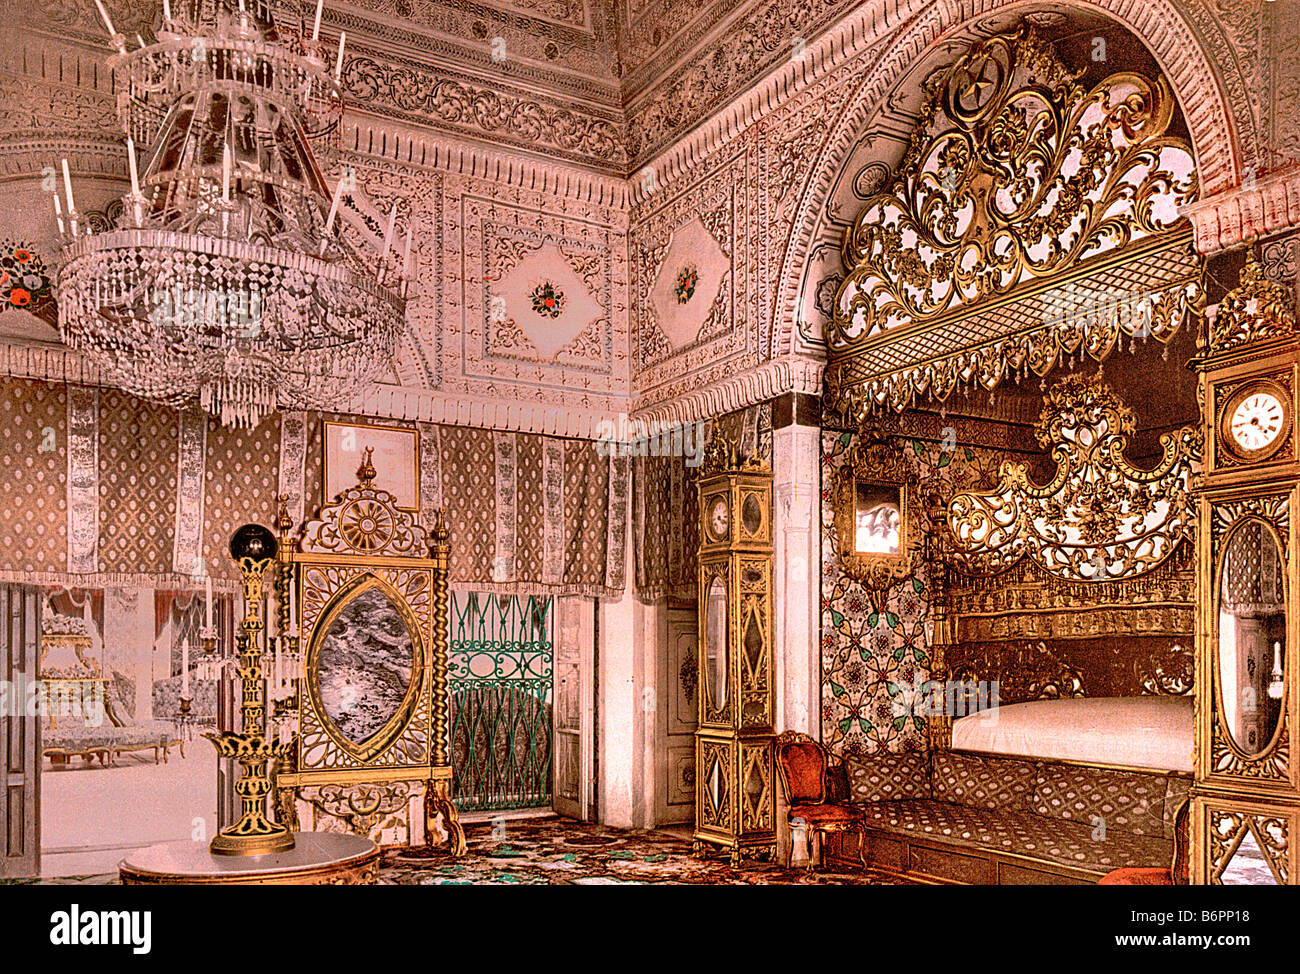 Dar el Bay, Palace of the Bey of Tunis, Tunisia - Bedchamber of the late Bey of Tunis, Kasr-el-Said, Tunisia. Date ca. 1899. Stock Photo